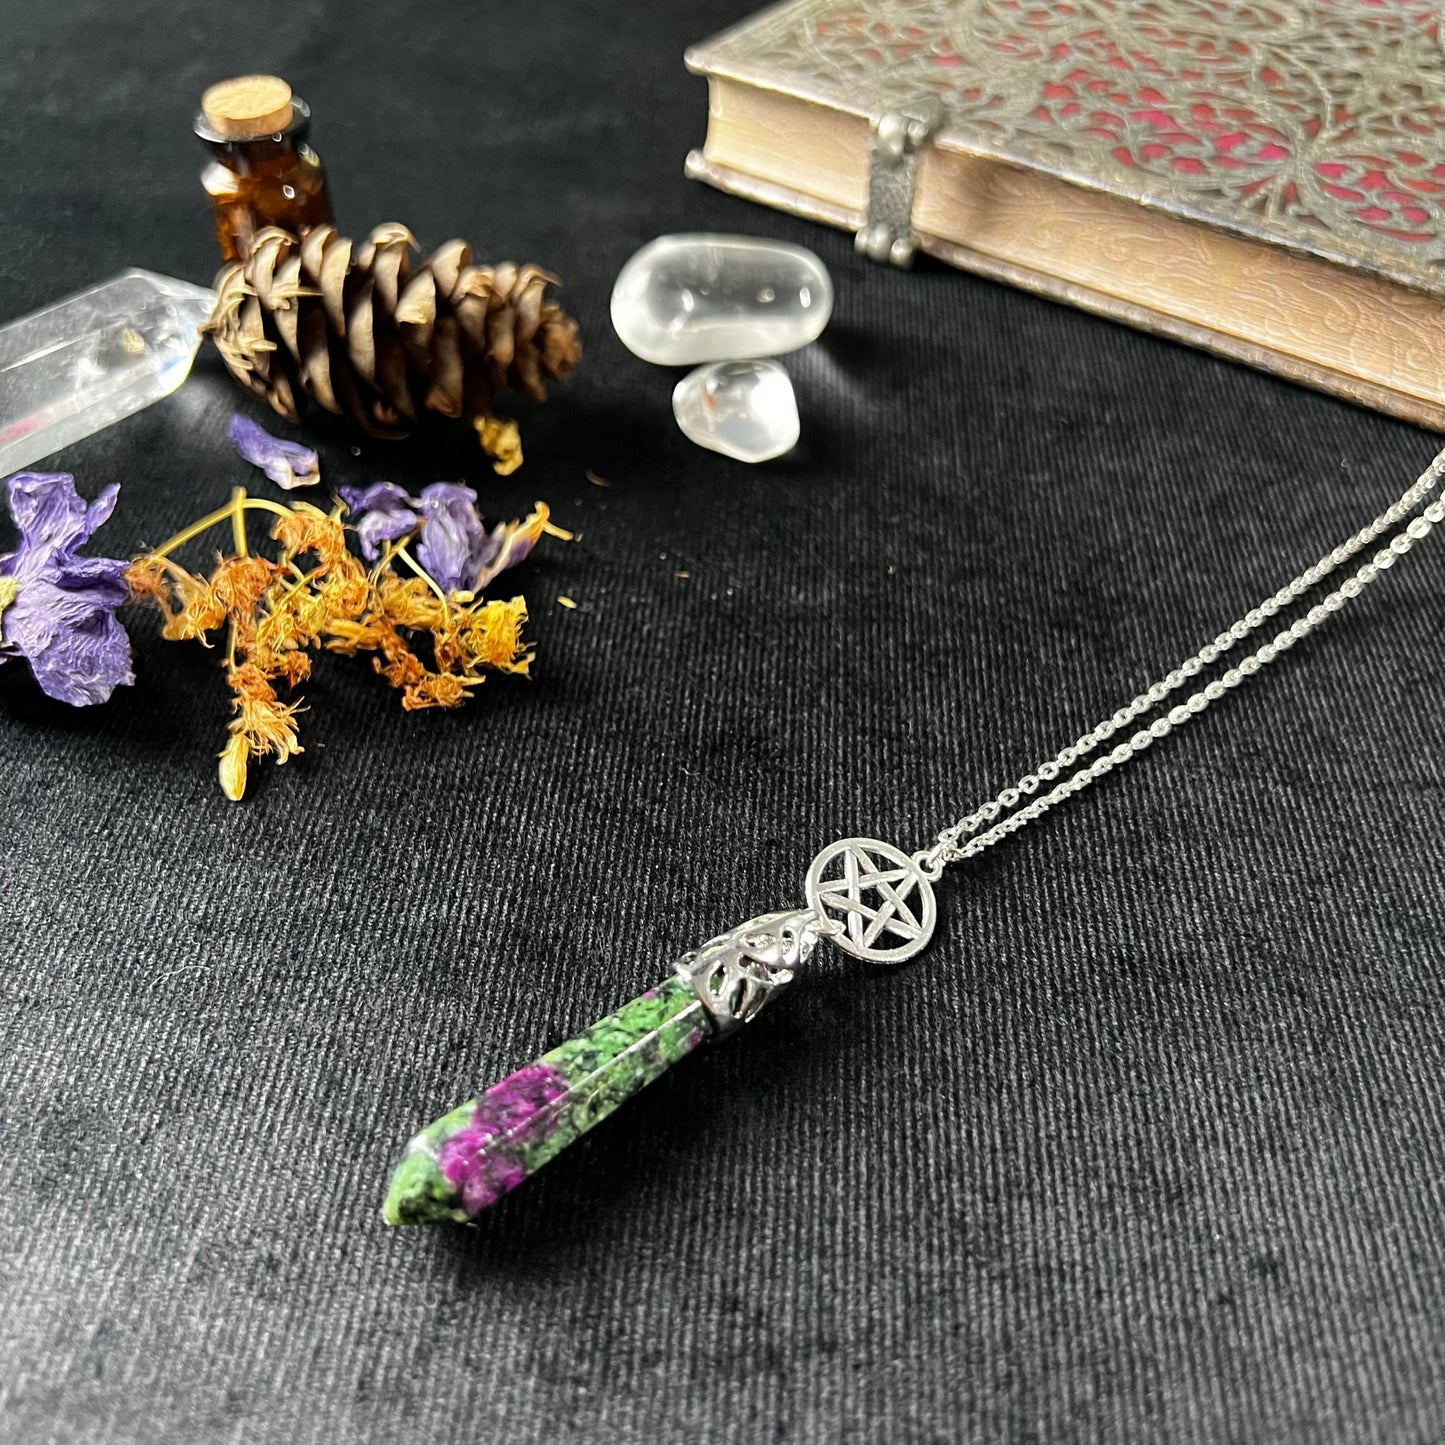 Ruby in Zoisite Anyolite crystal and pentacle divination necklace - The French Witch shop